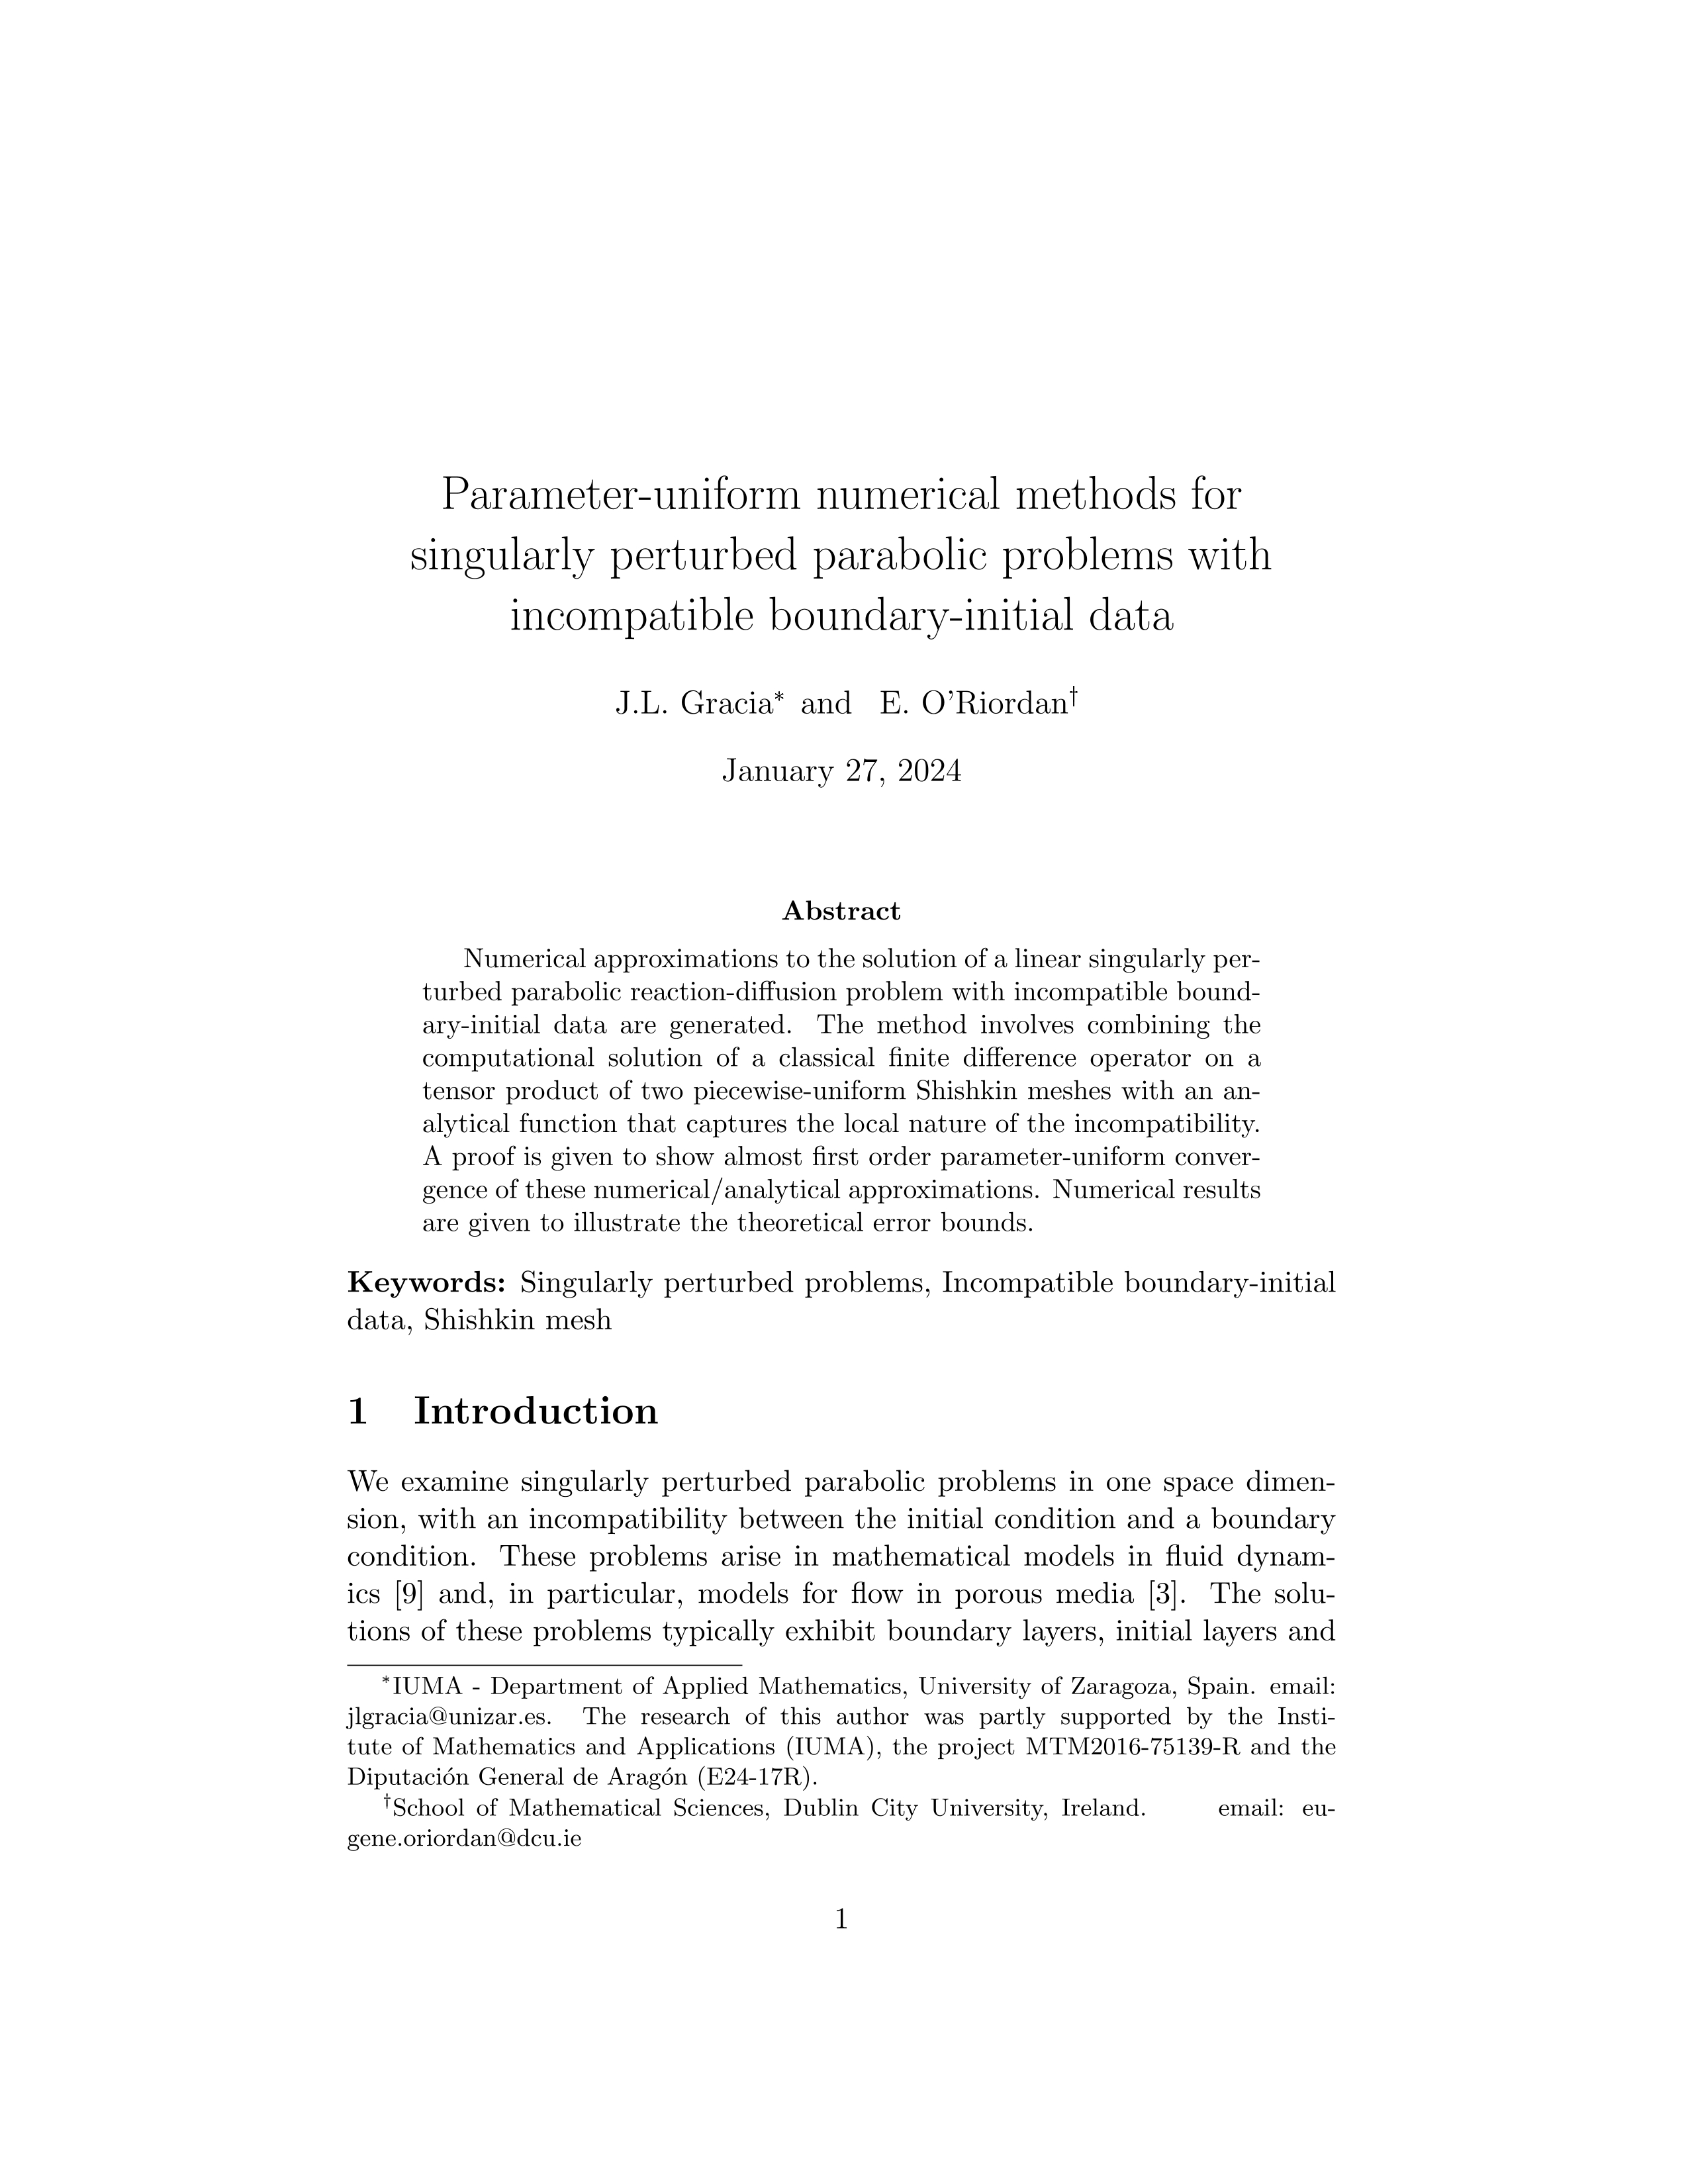 Parameter-uniform numerical methods for singularly perturbed parabolic problems with incompatible boundary-initial data